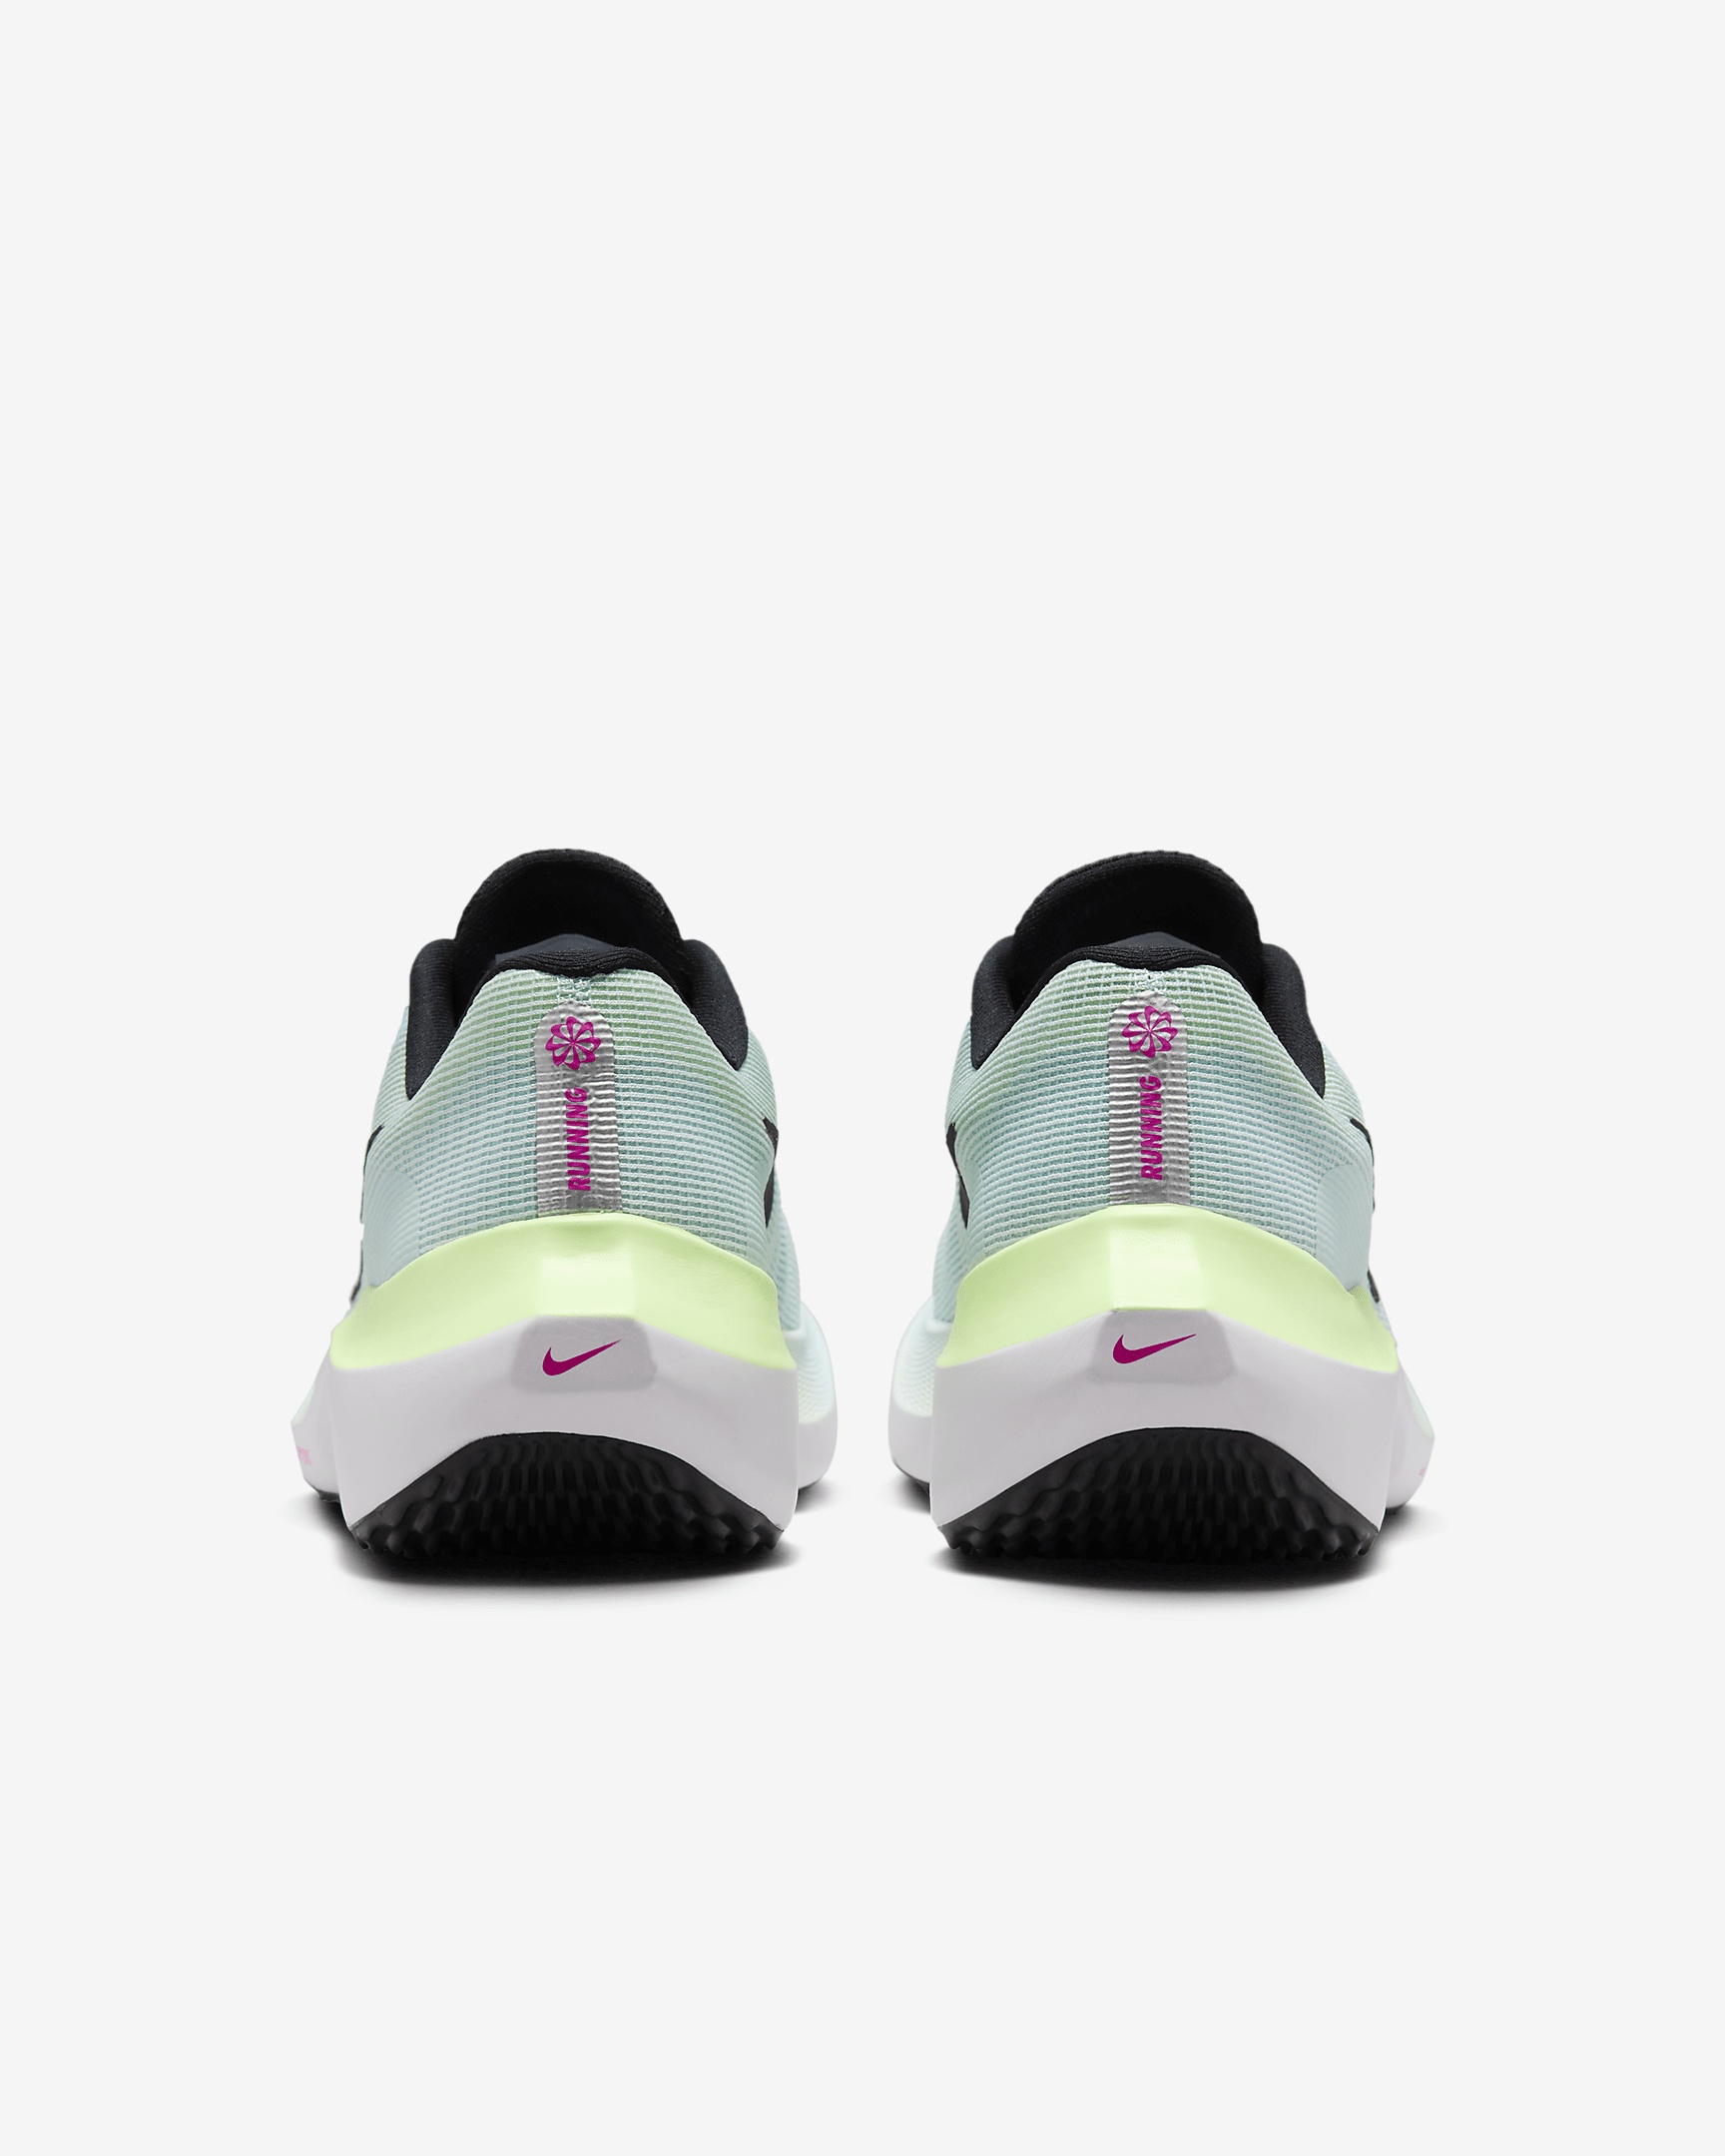 Nike Women's Zoom Fly 5 Road Running Shoes - 6